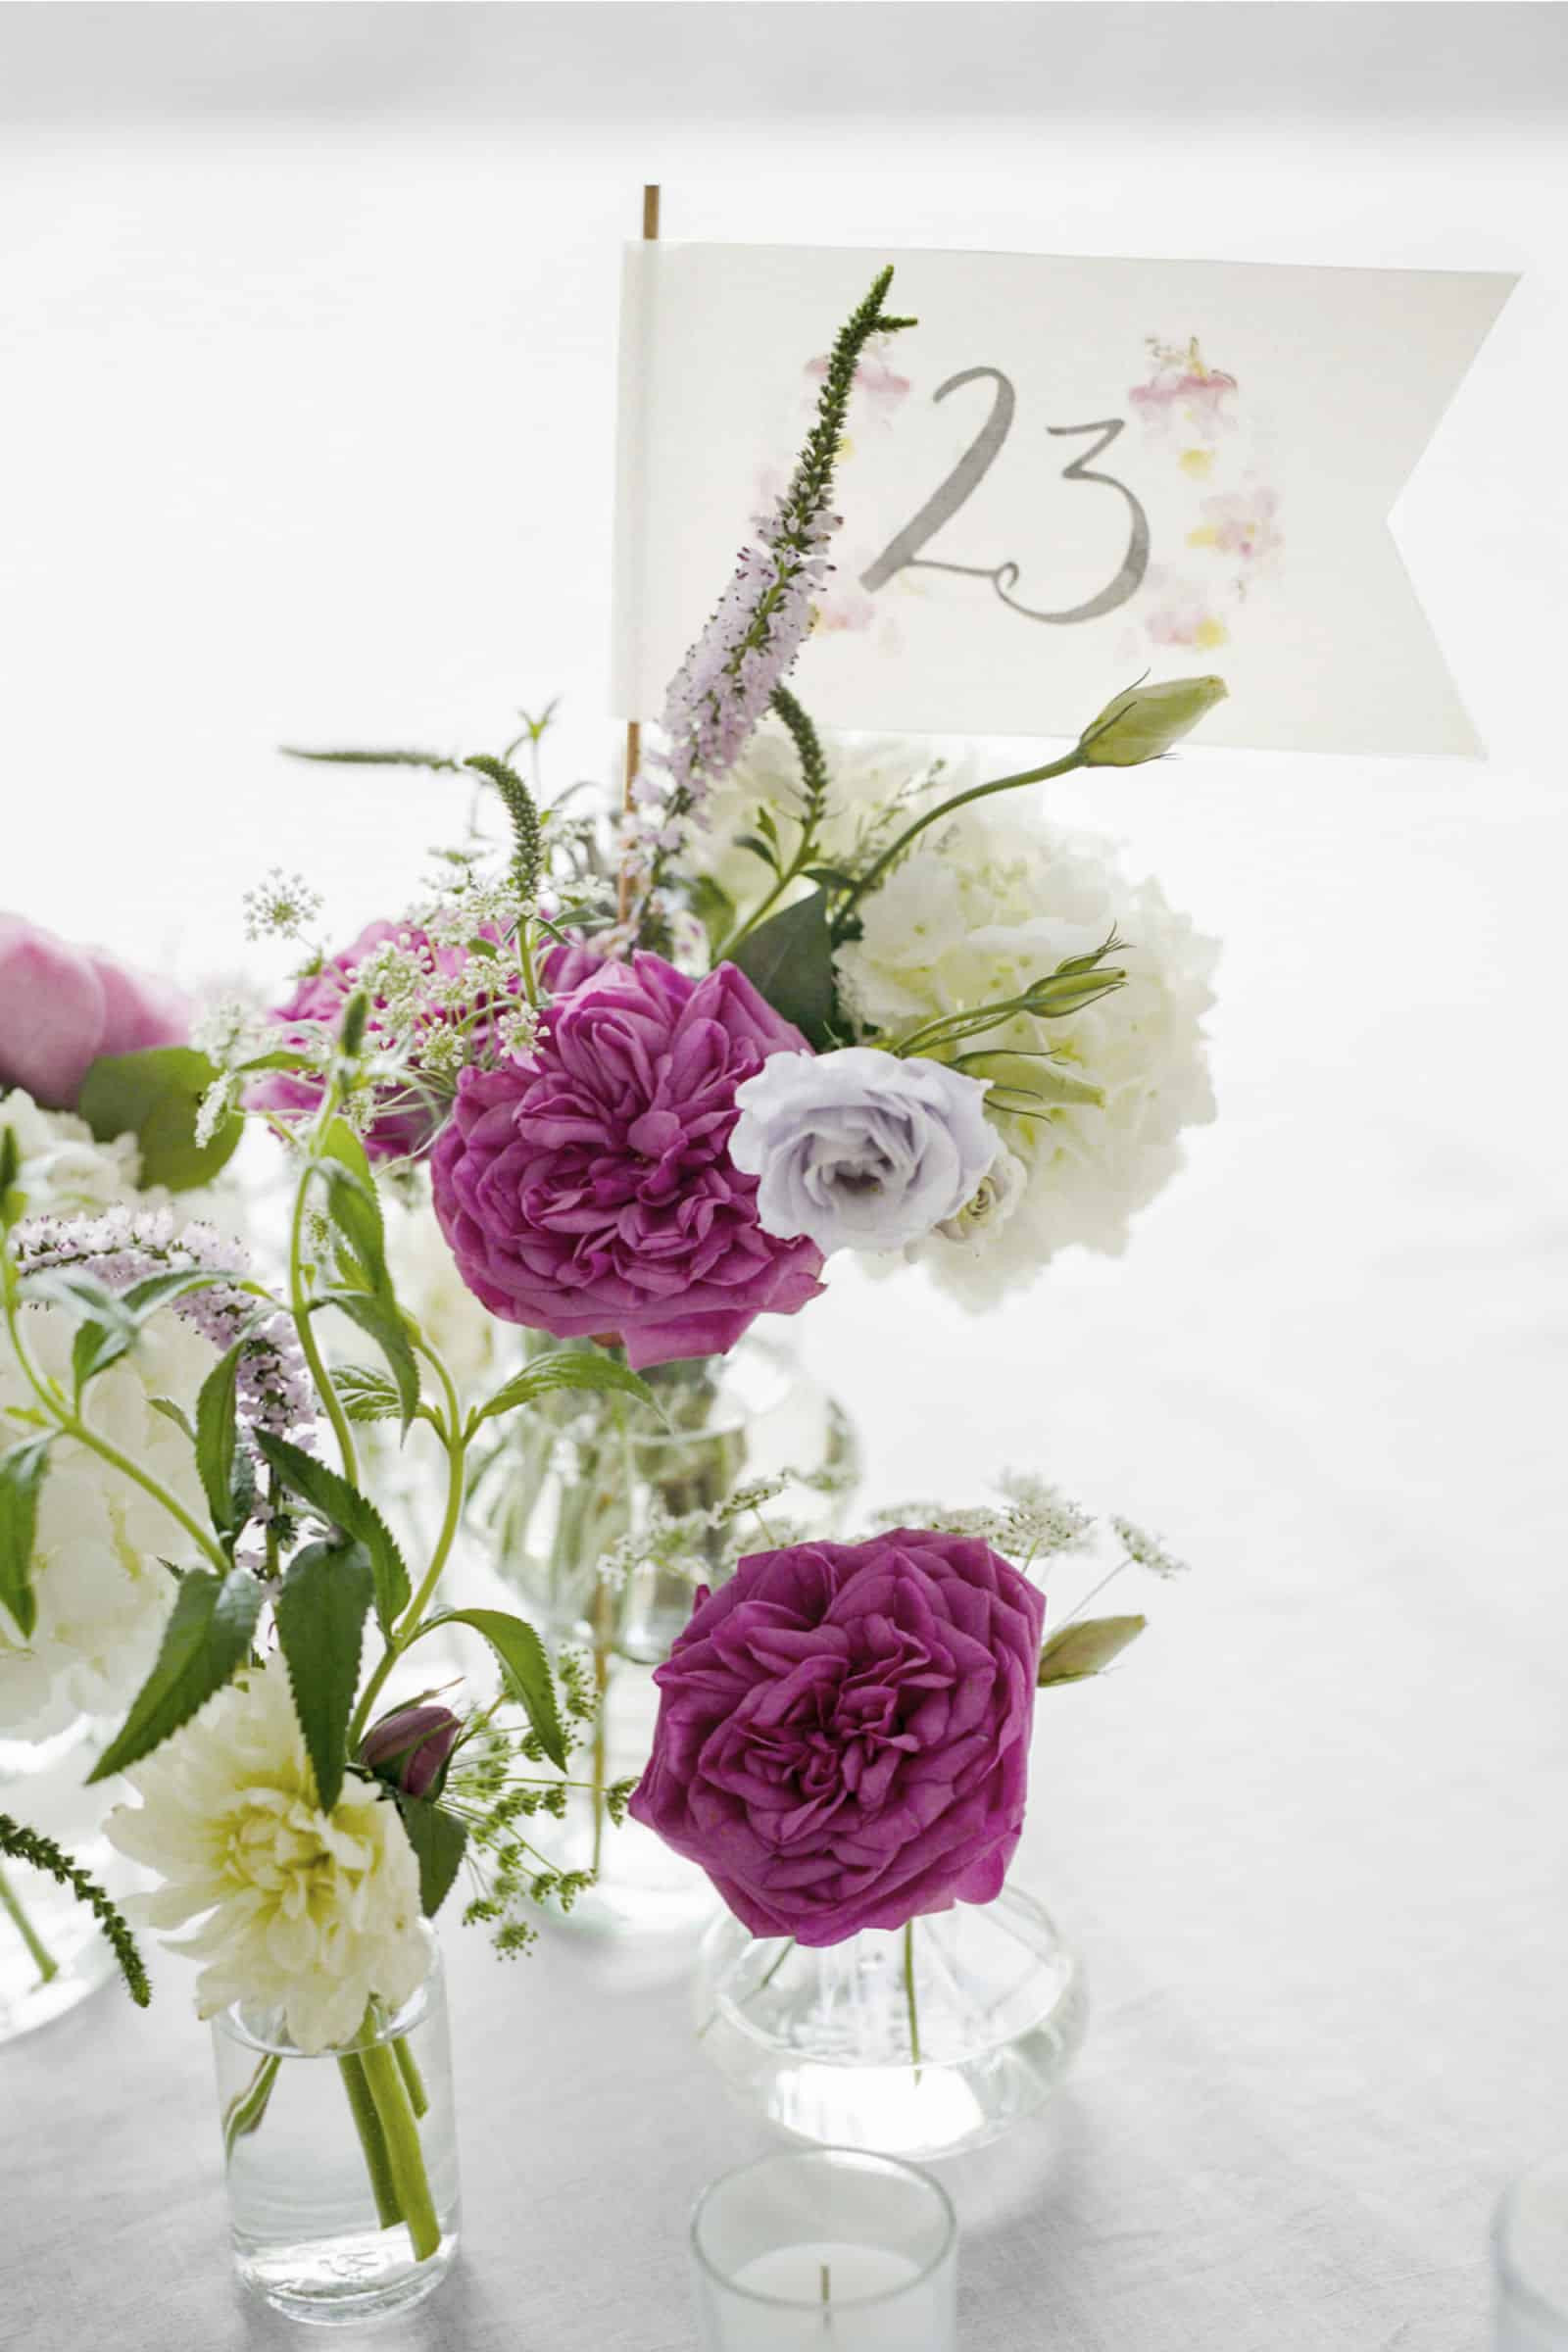 DIY Flower Centerpieces For Weddings
 15 Wedding Centerpieces That You Can DIY